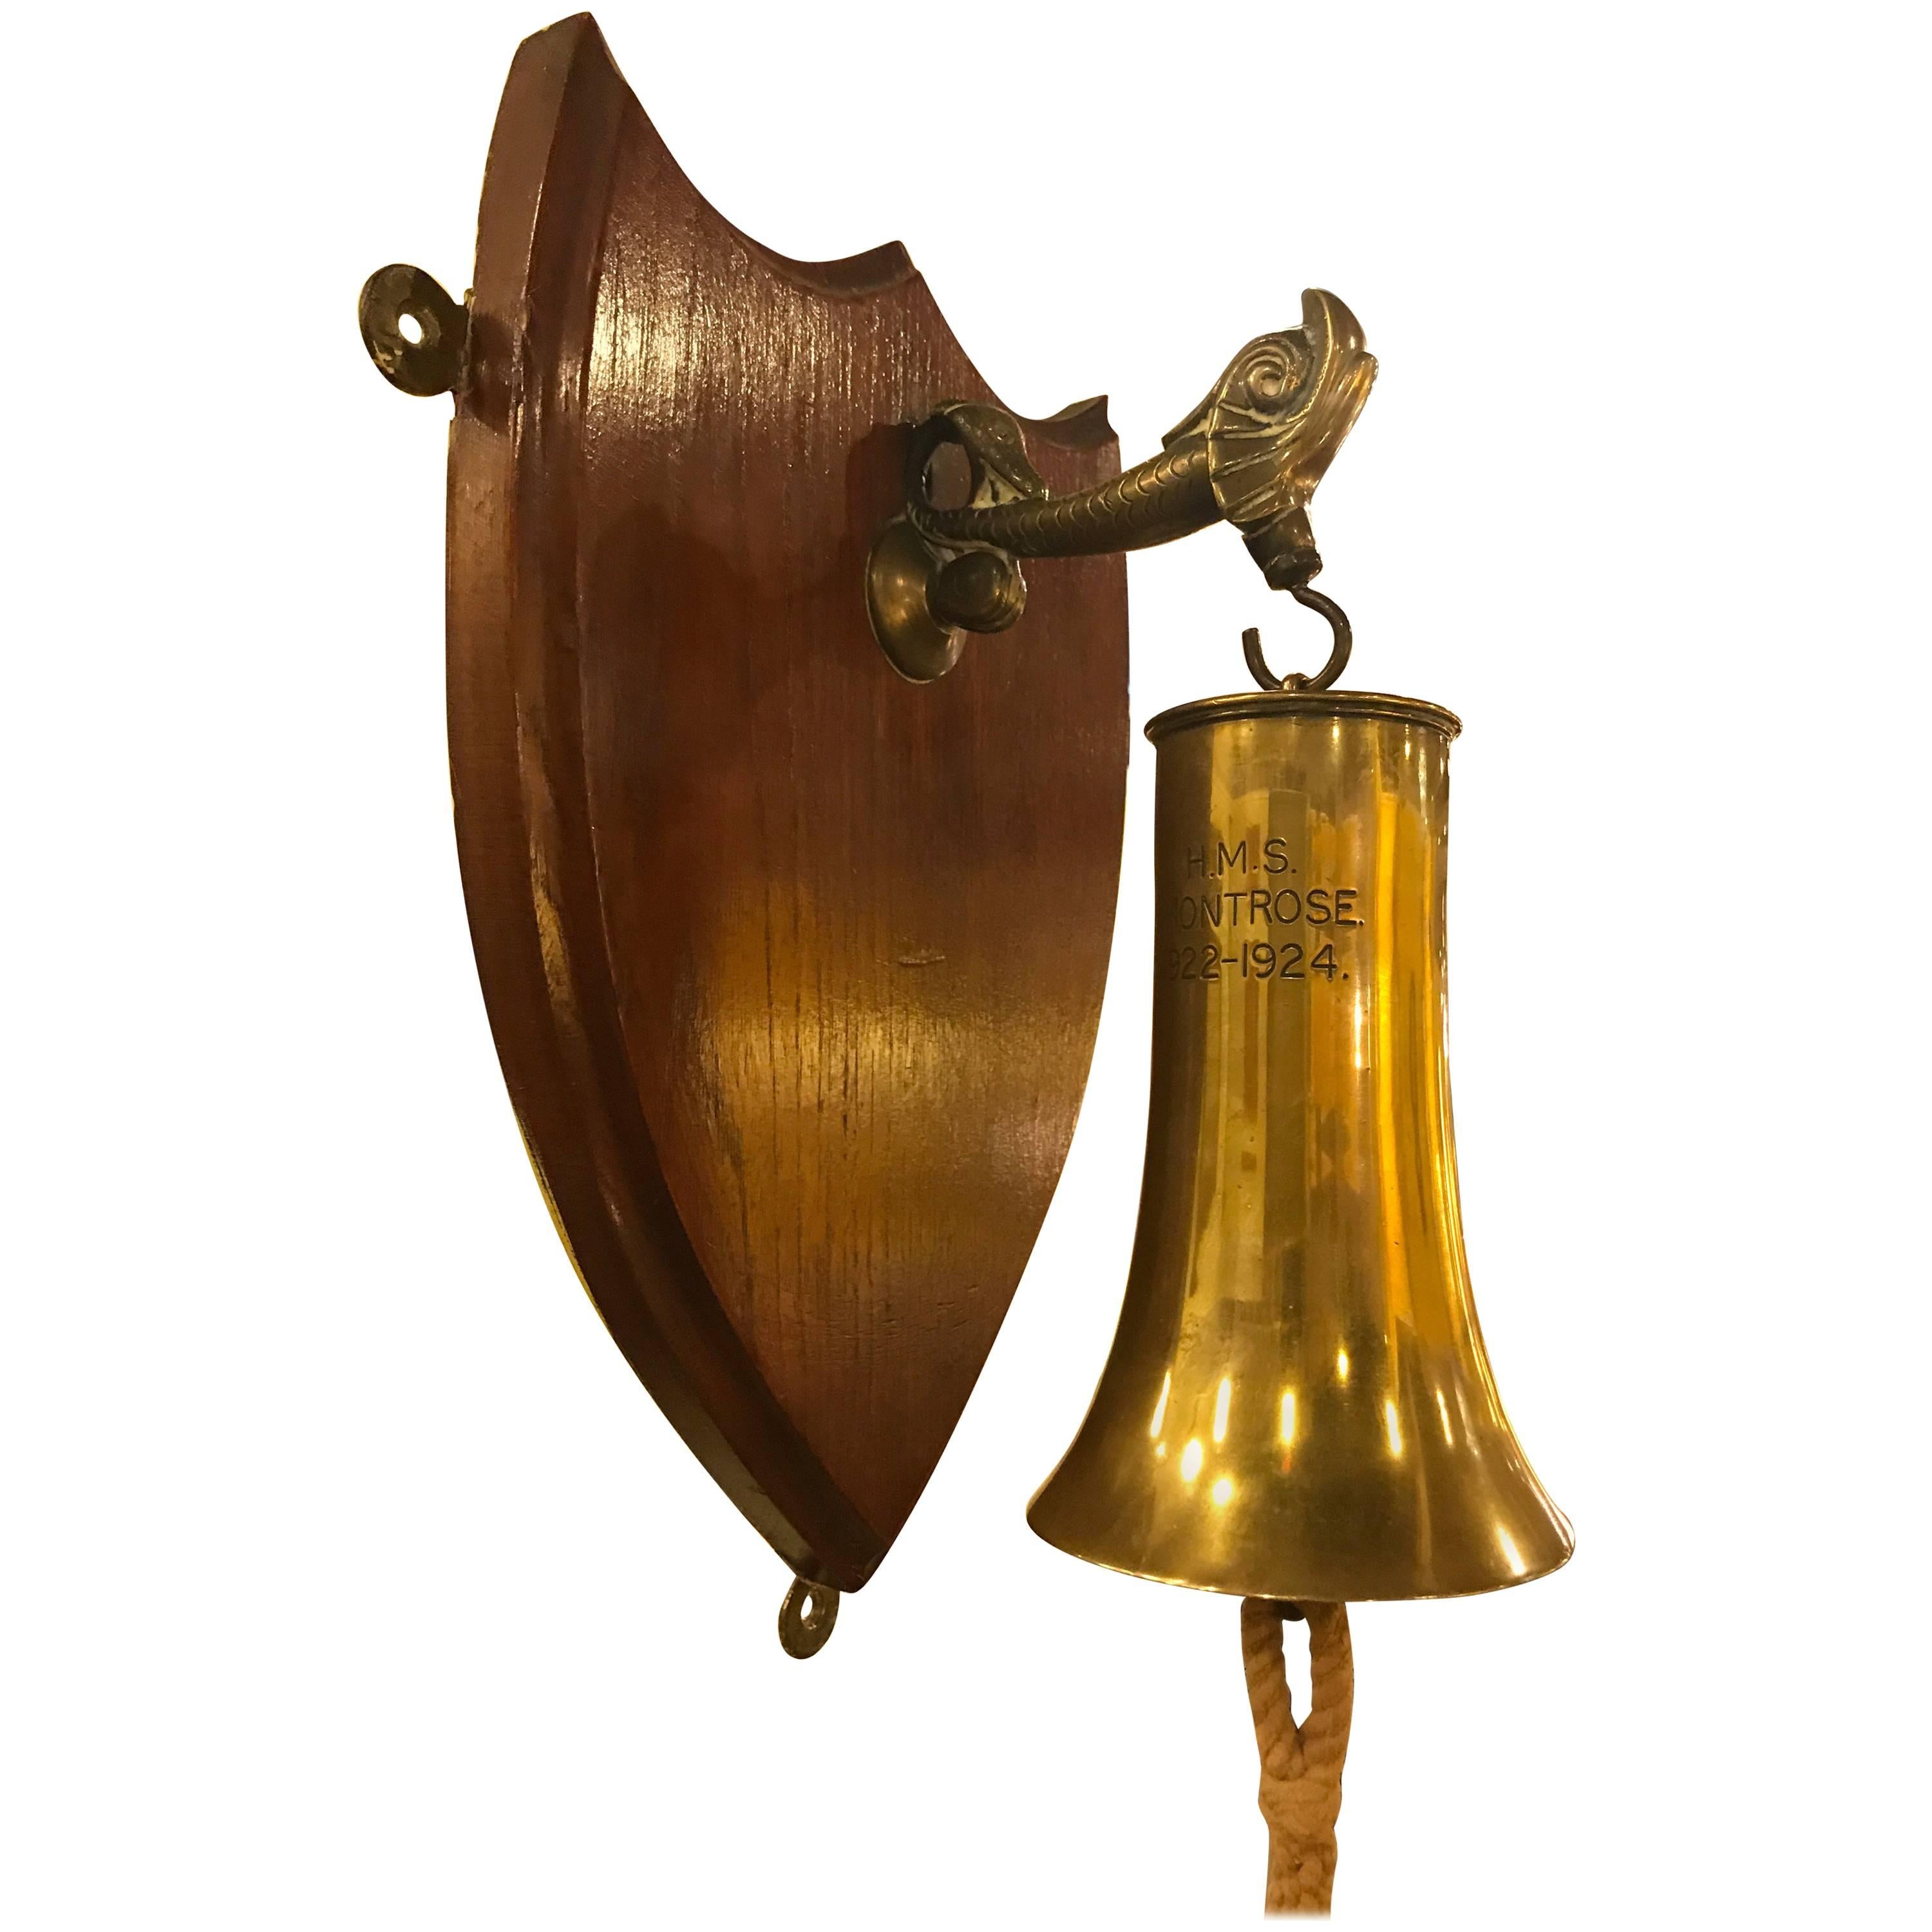 Mounted Ships Bell Made from Artillary Shell, Signed